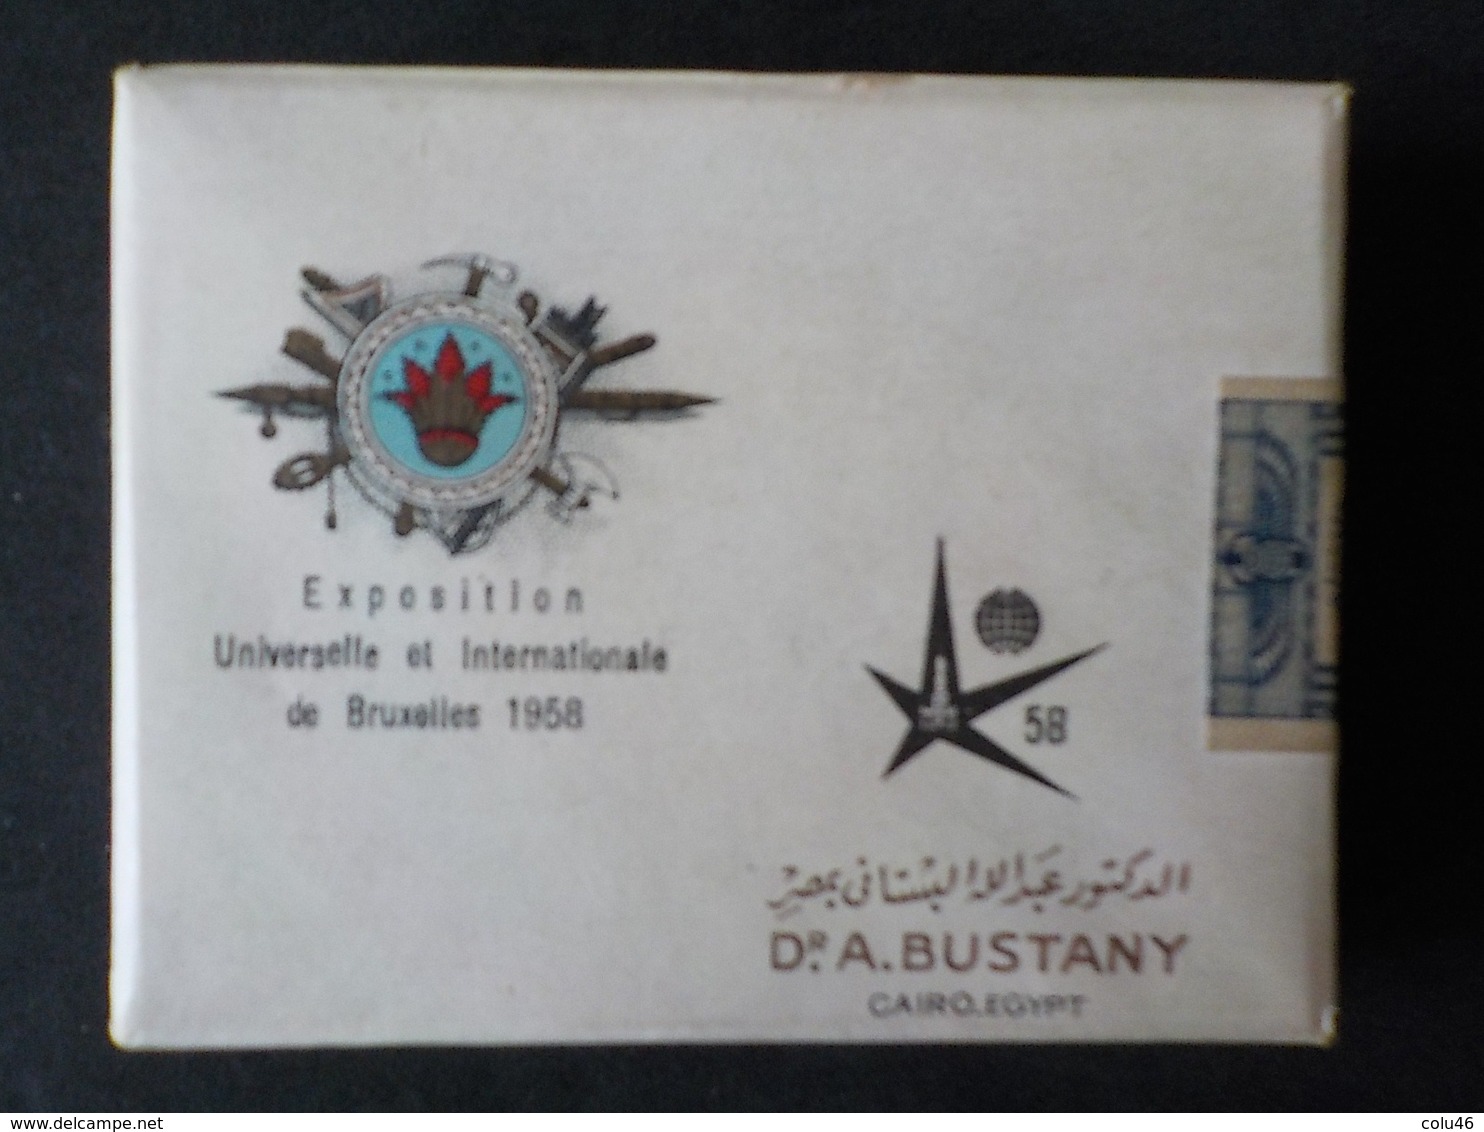 Expo 1958  Paquet 12 Cigarettes Cairo Egypte A. Bustany Exposition Universelle 58 Bruxelles Egyptian Cigaret Box - Other & Unclassified